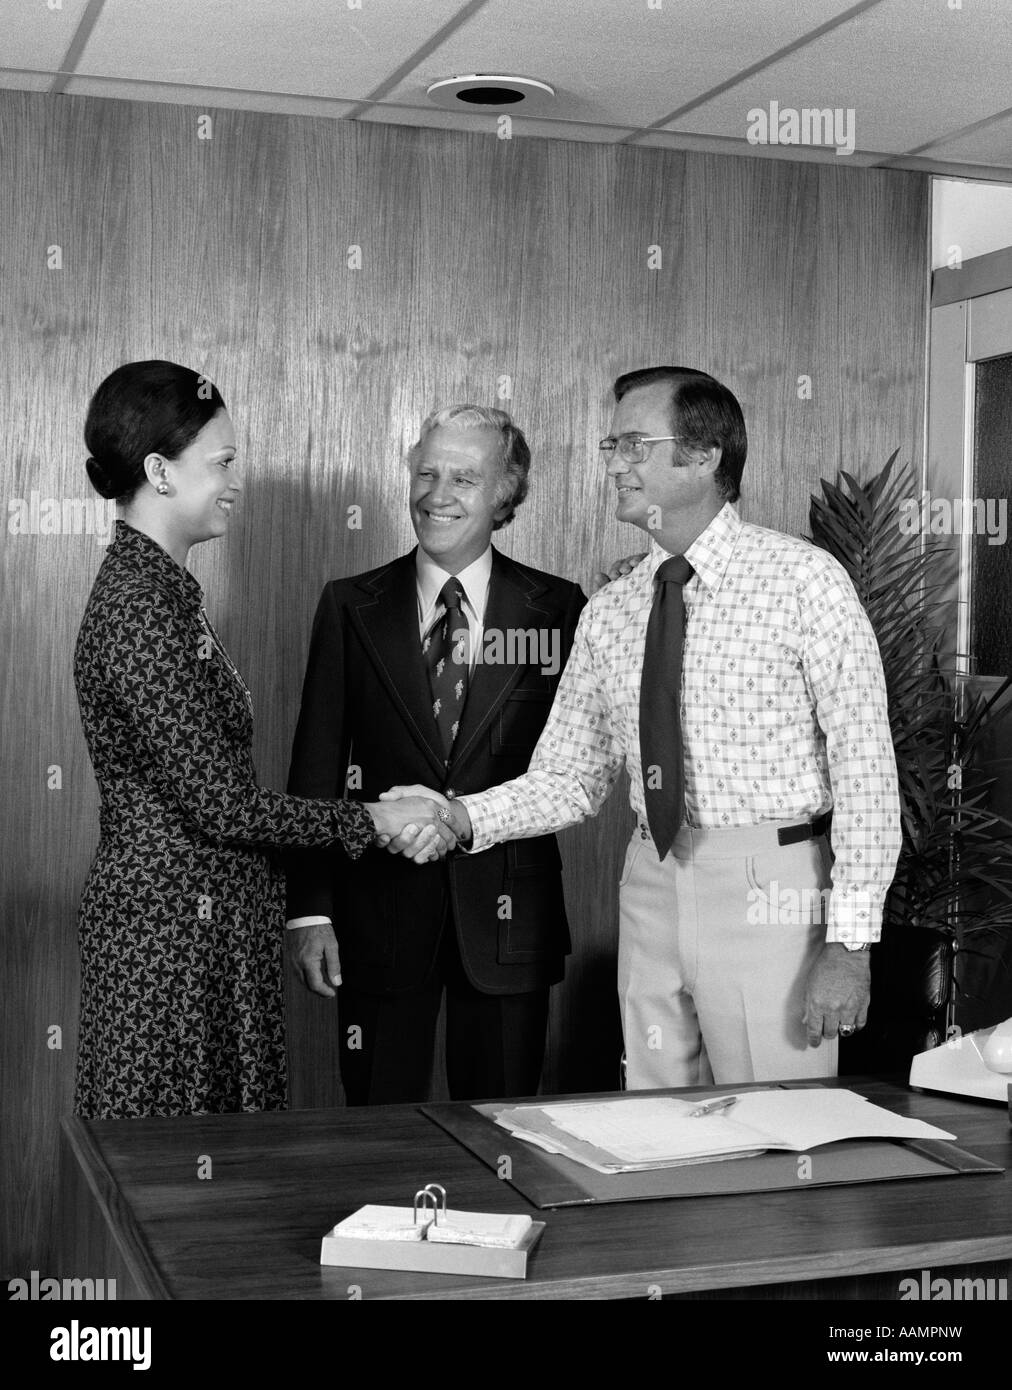 1970s 2 MEN ONE AFRICAN AMERICAN WOMAN SHAKING HANDS AGREEMENT AT BUSINESS MEETING Stock Photo